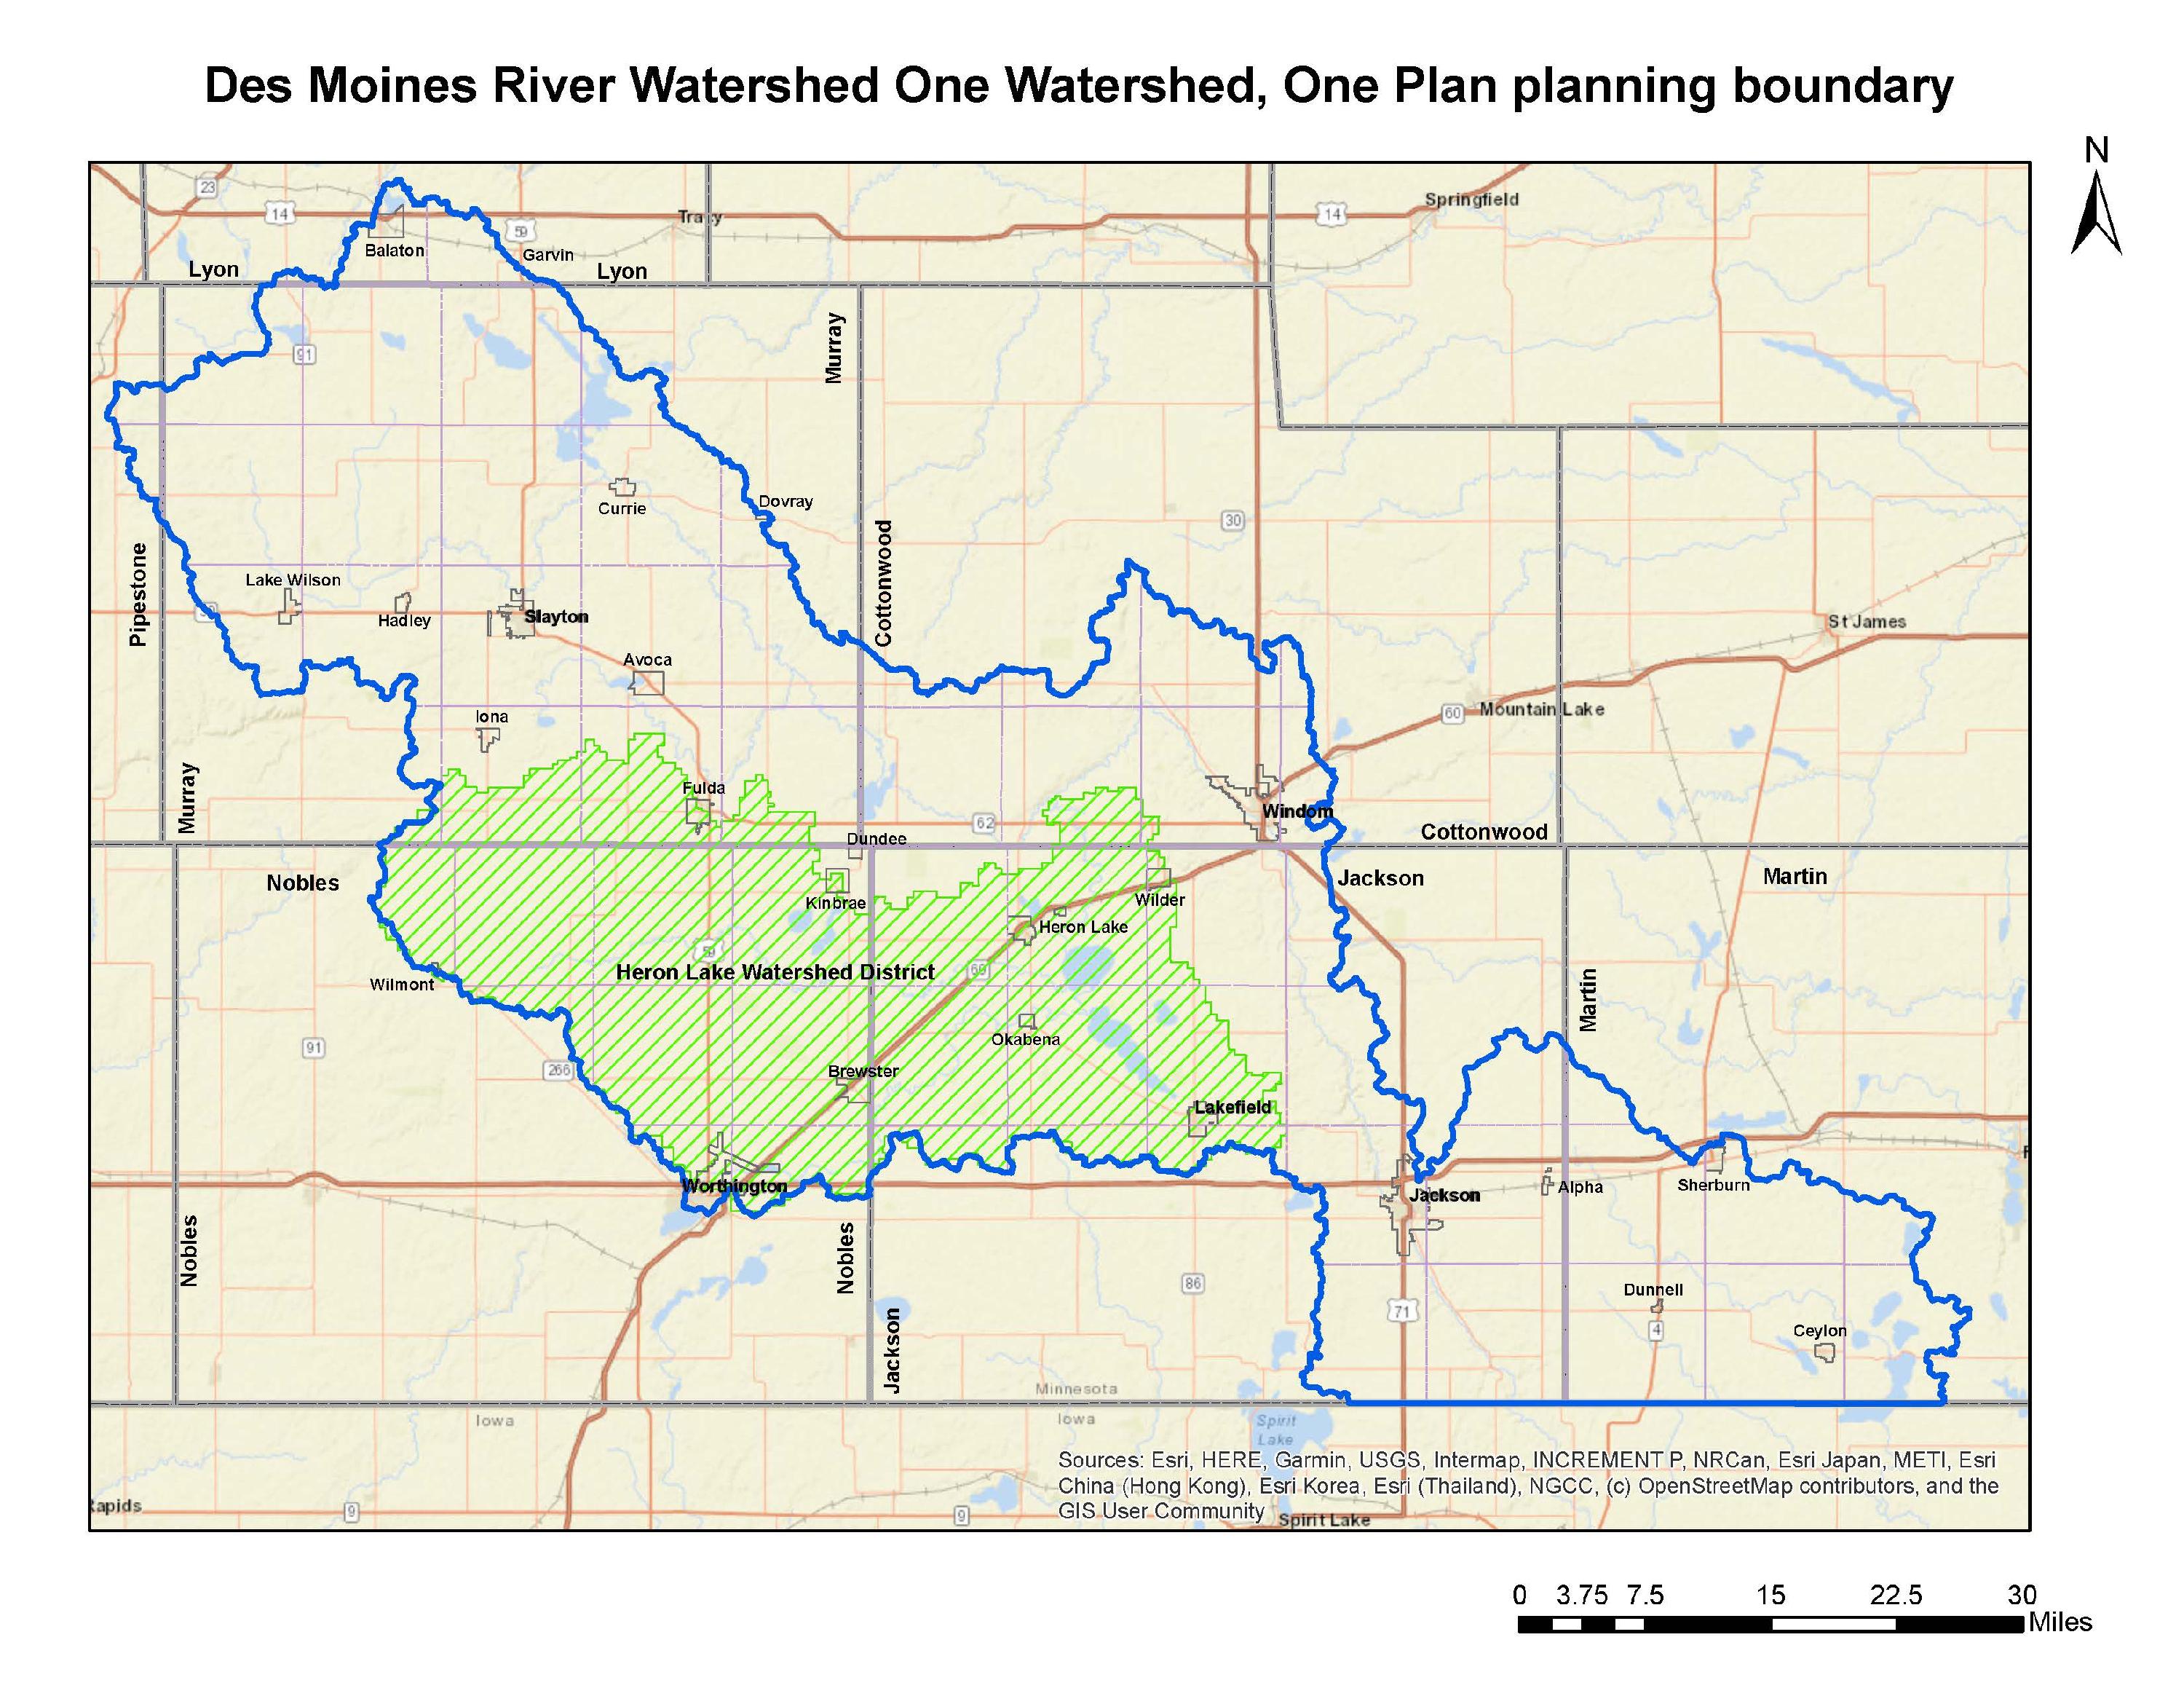 DMR Watershed boundary Map